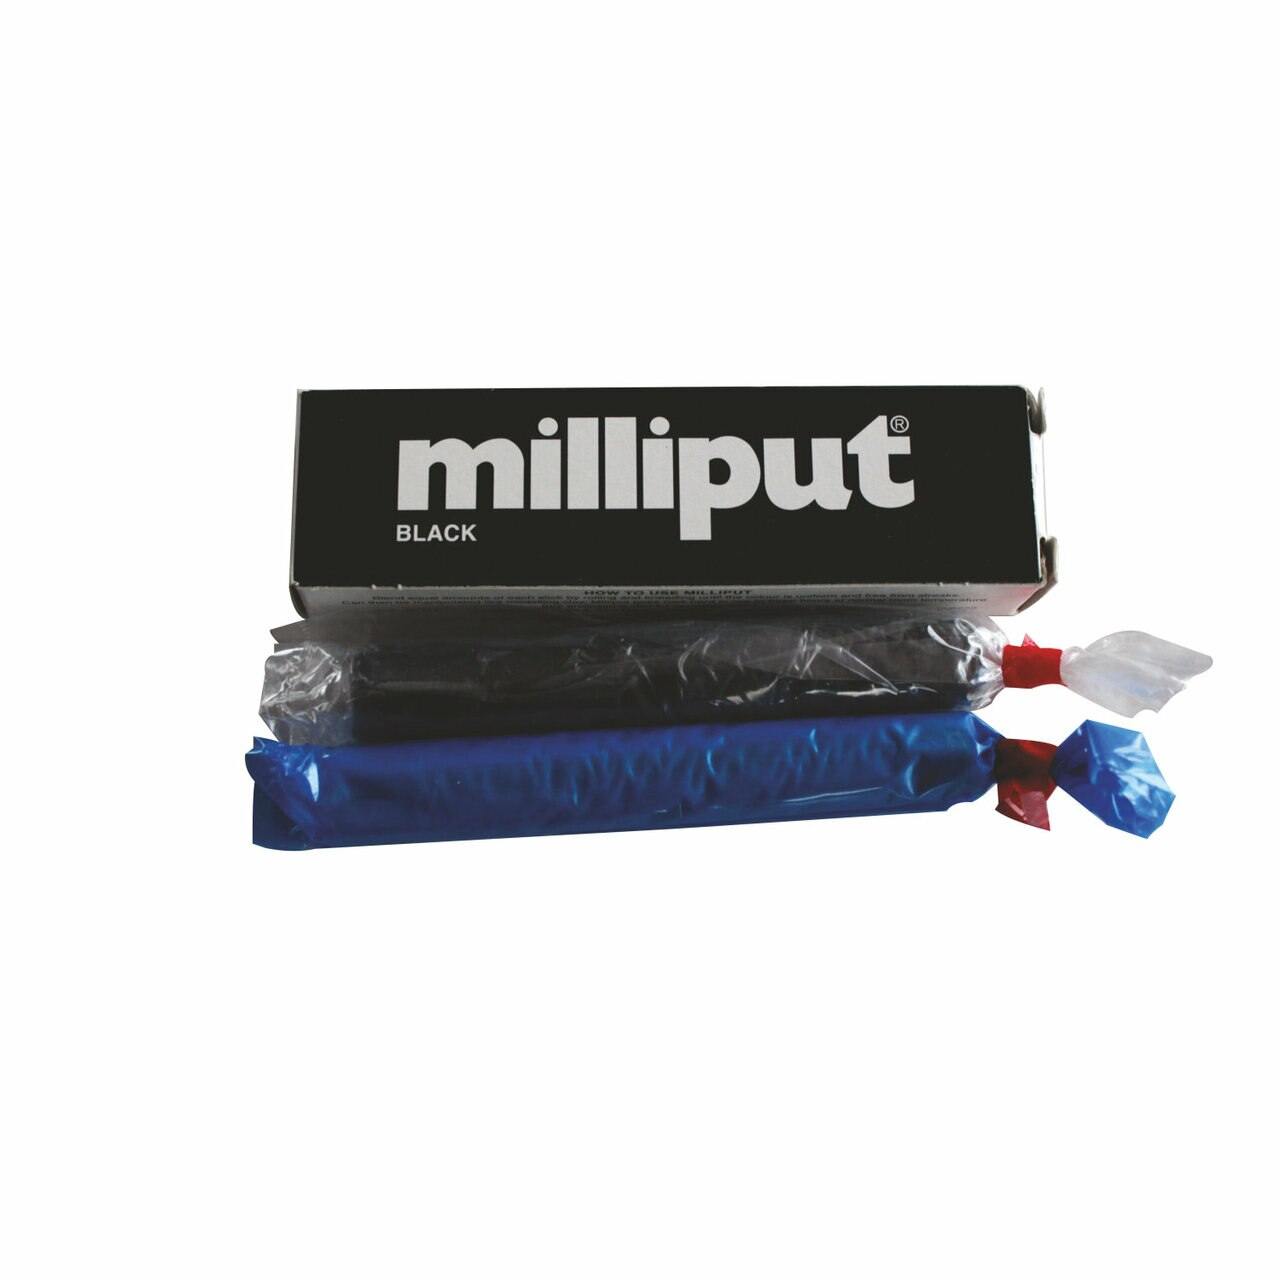 Buy Milliput: Black - Epoxy Putty at King Games - Miniatures, Board Games &  Accessories